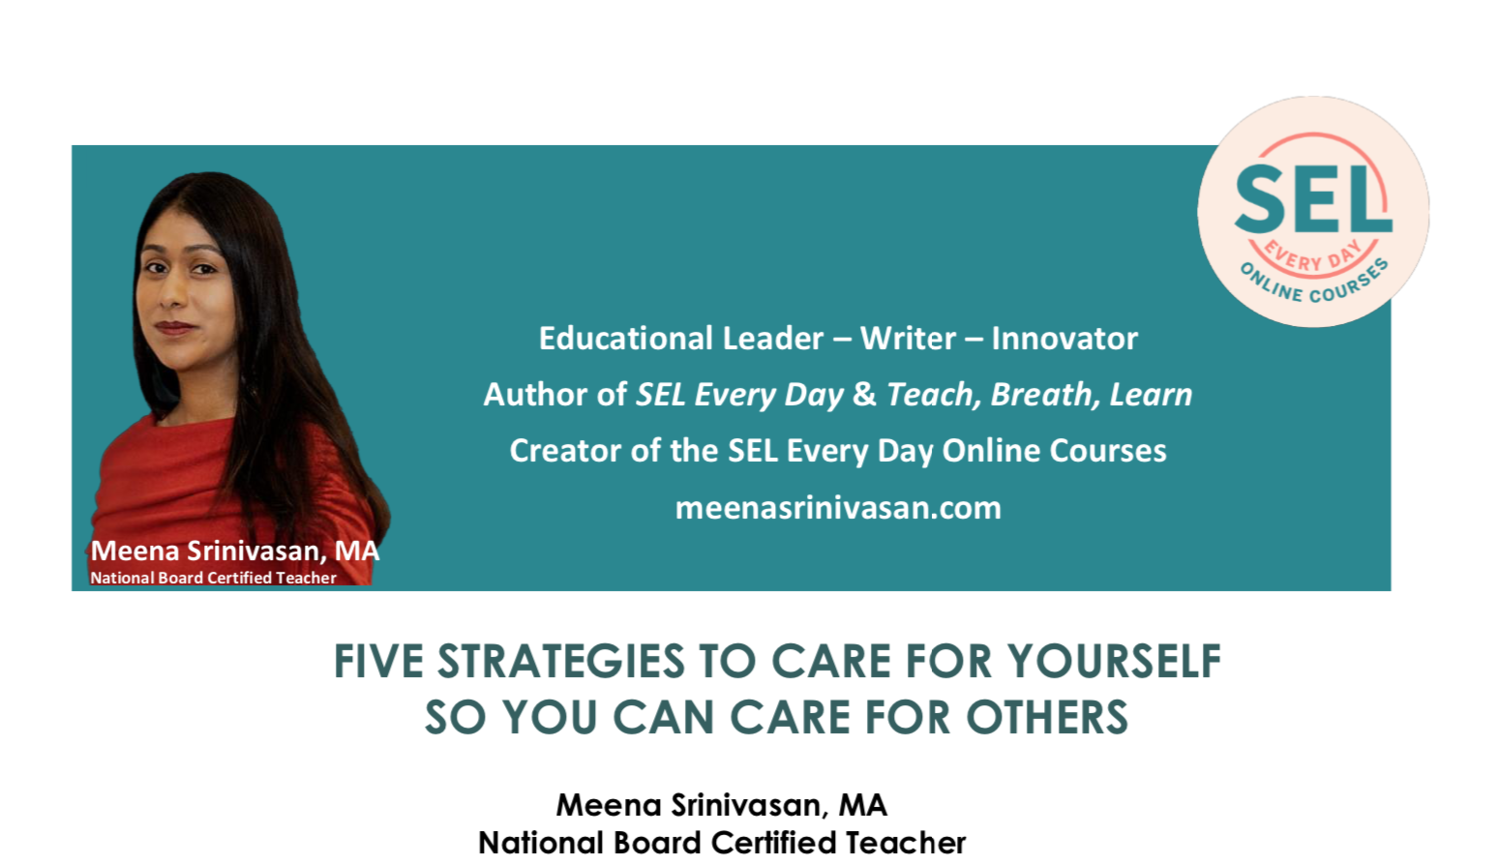 FIVE STRATEGIES TO CARE FOR YOURSELF <br/>SO YOU CAN CARE FOR OTHERS — MEENA SRINIVASAN